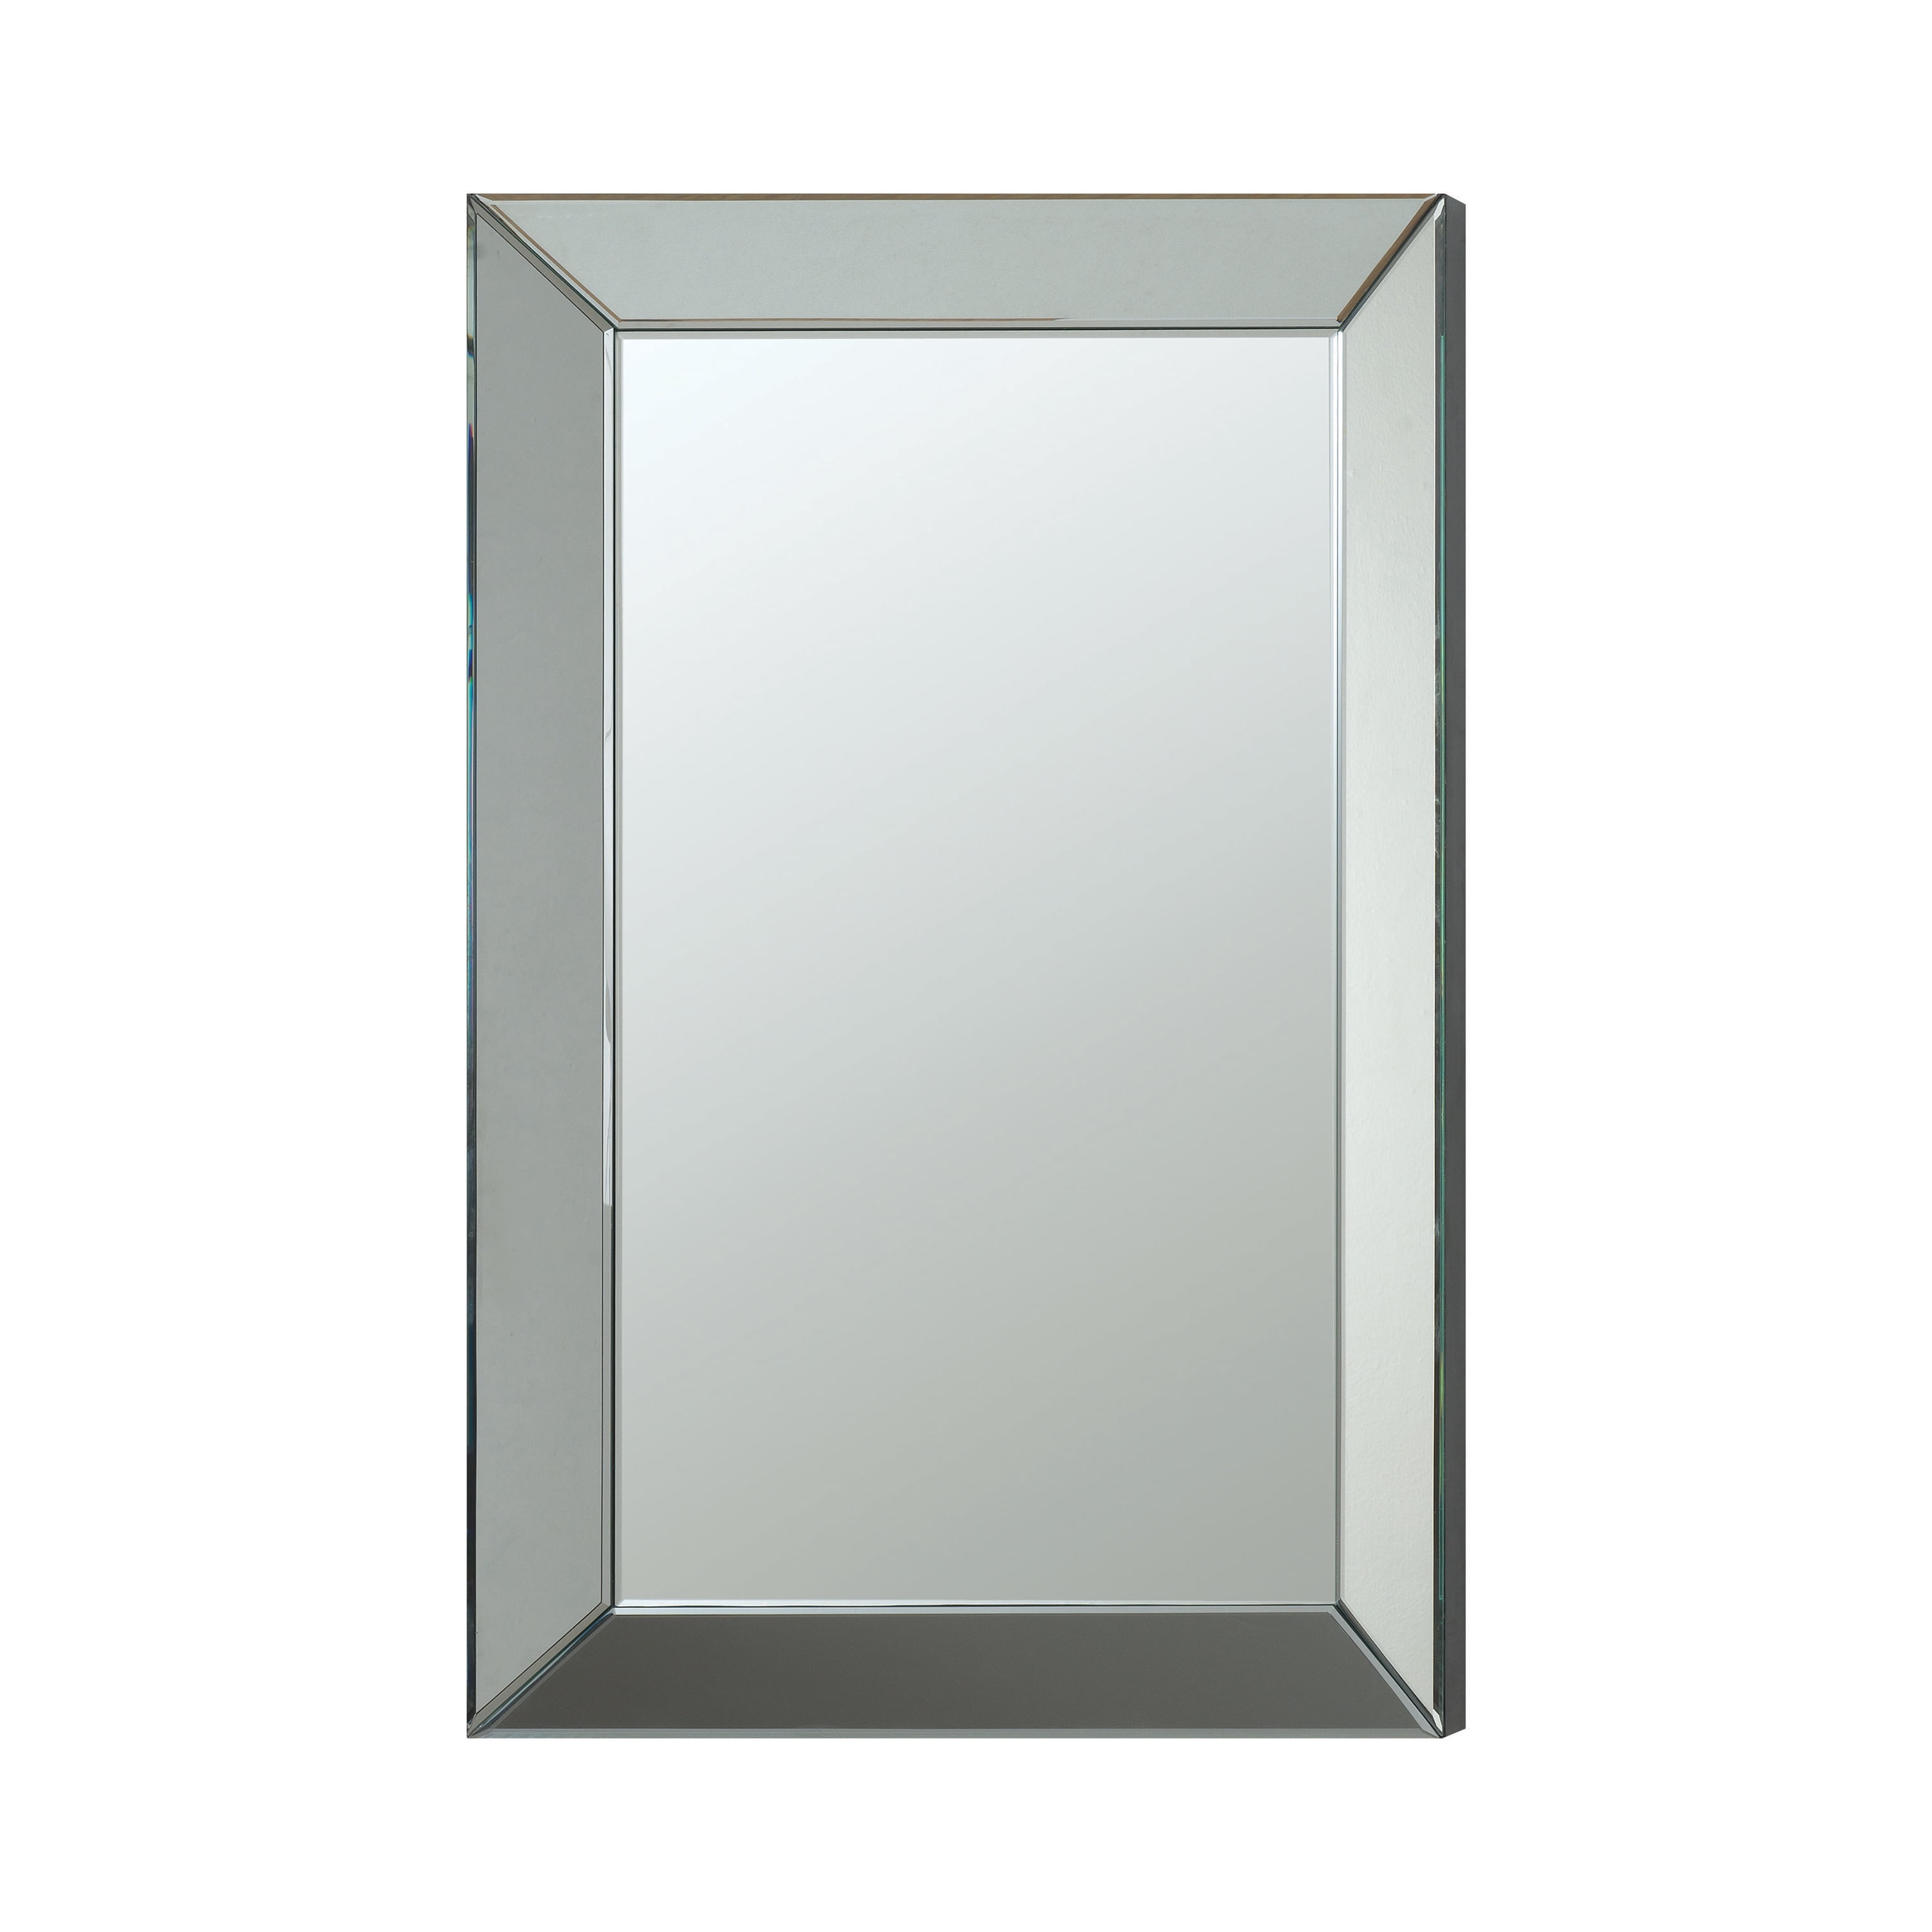 Coaster Home Furnishings Rectangular Wall Mirror with Mirrored Frame